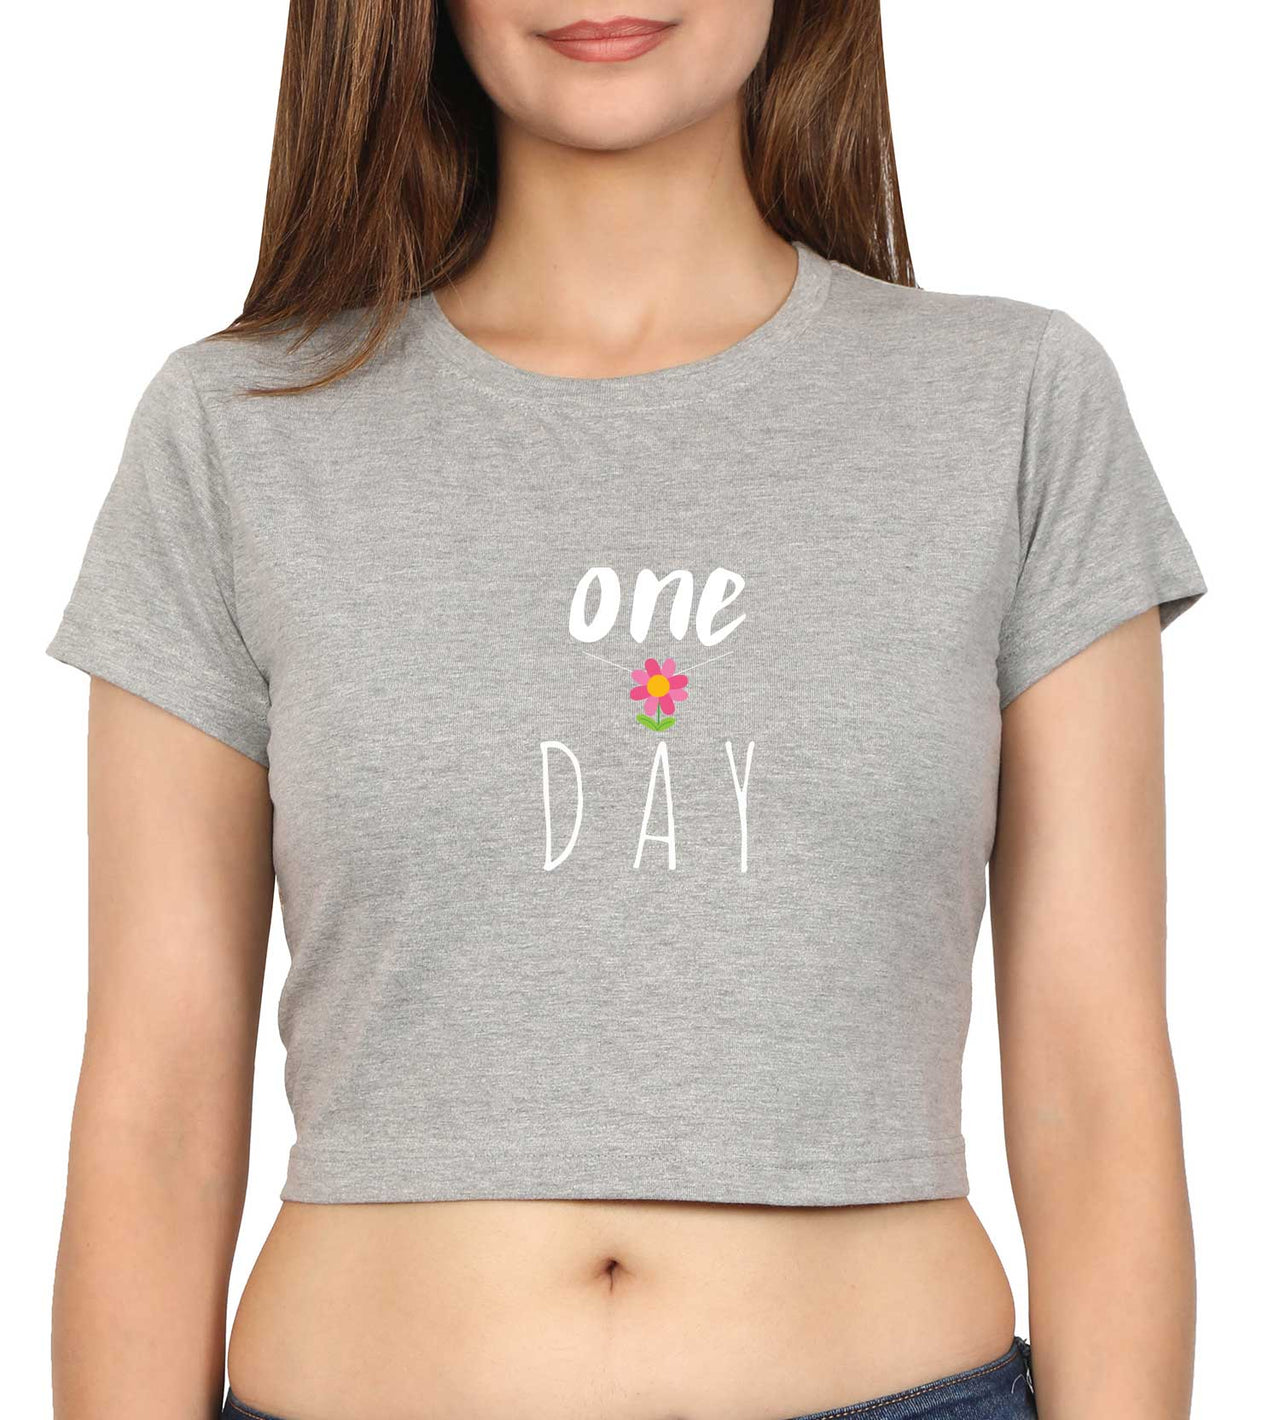 One Day Crop Top